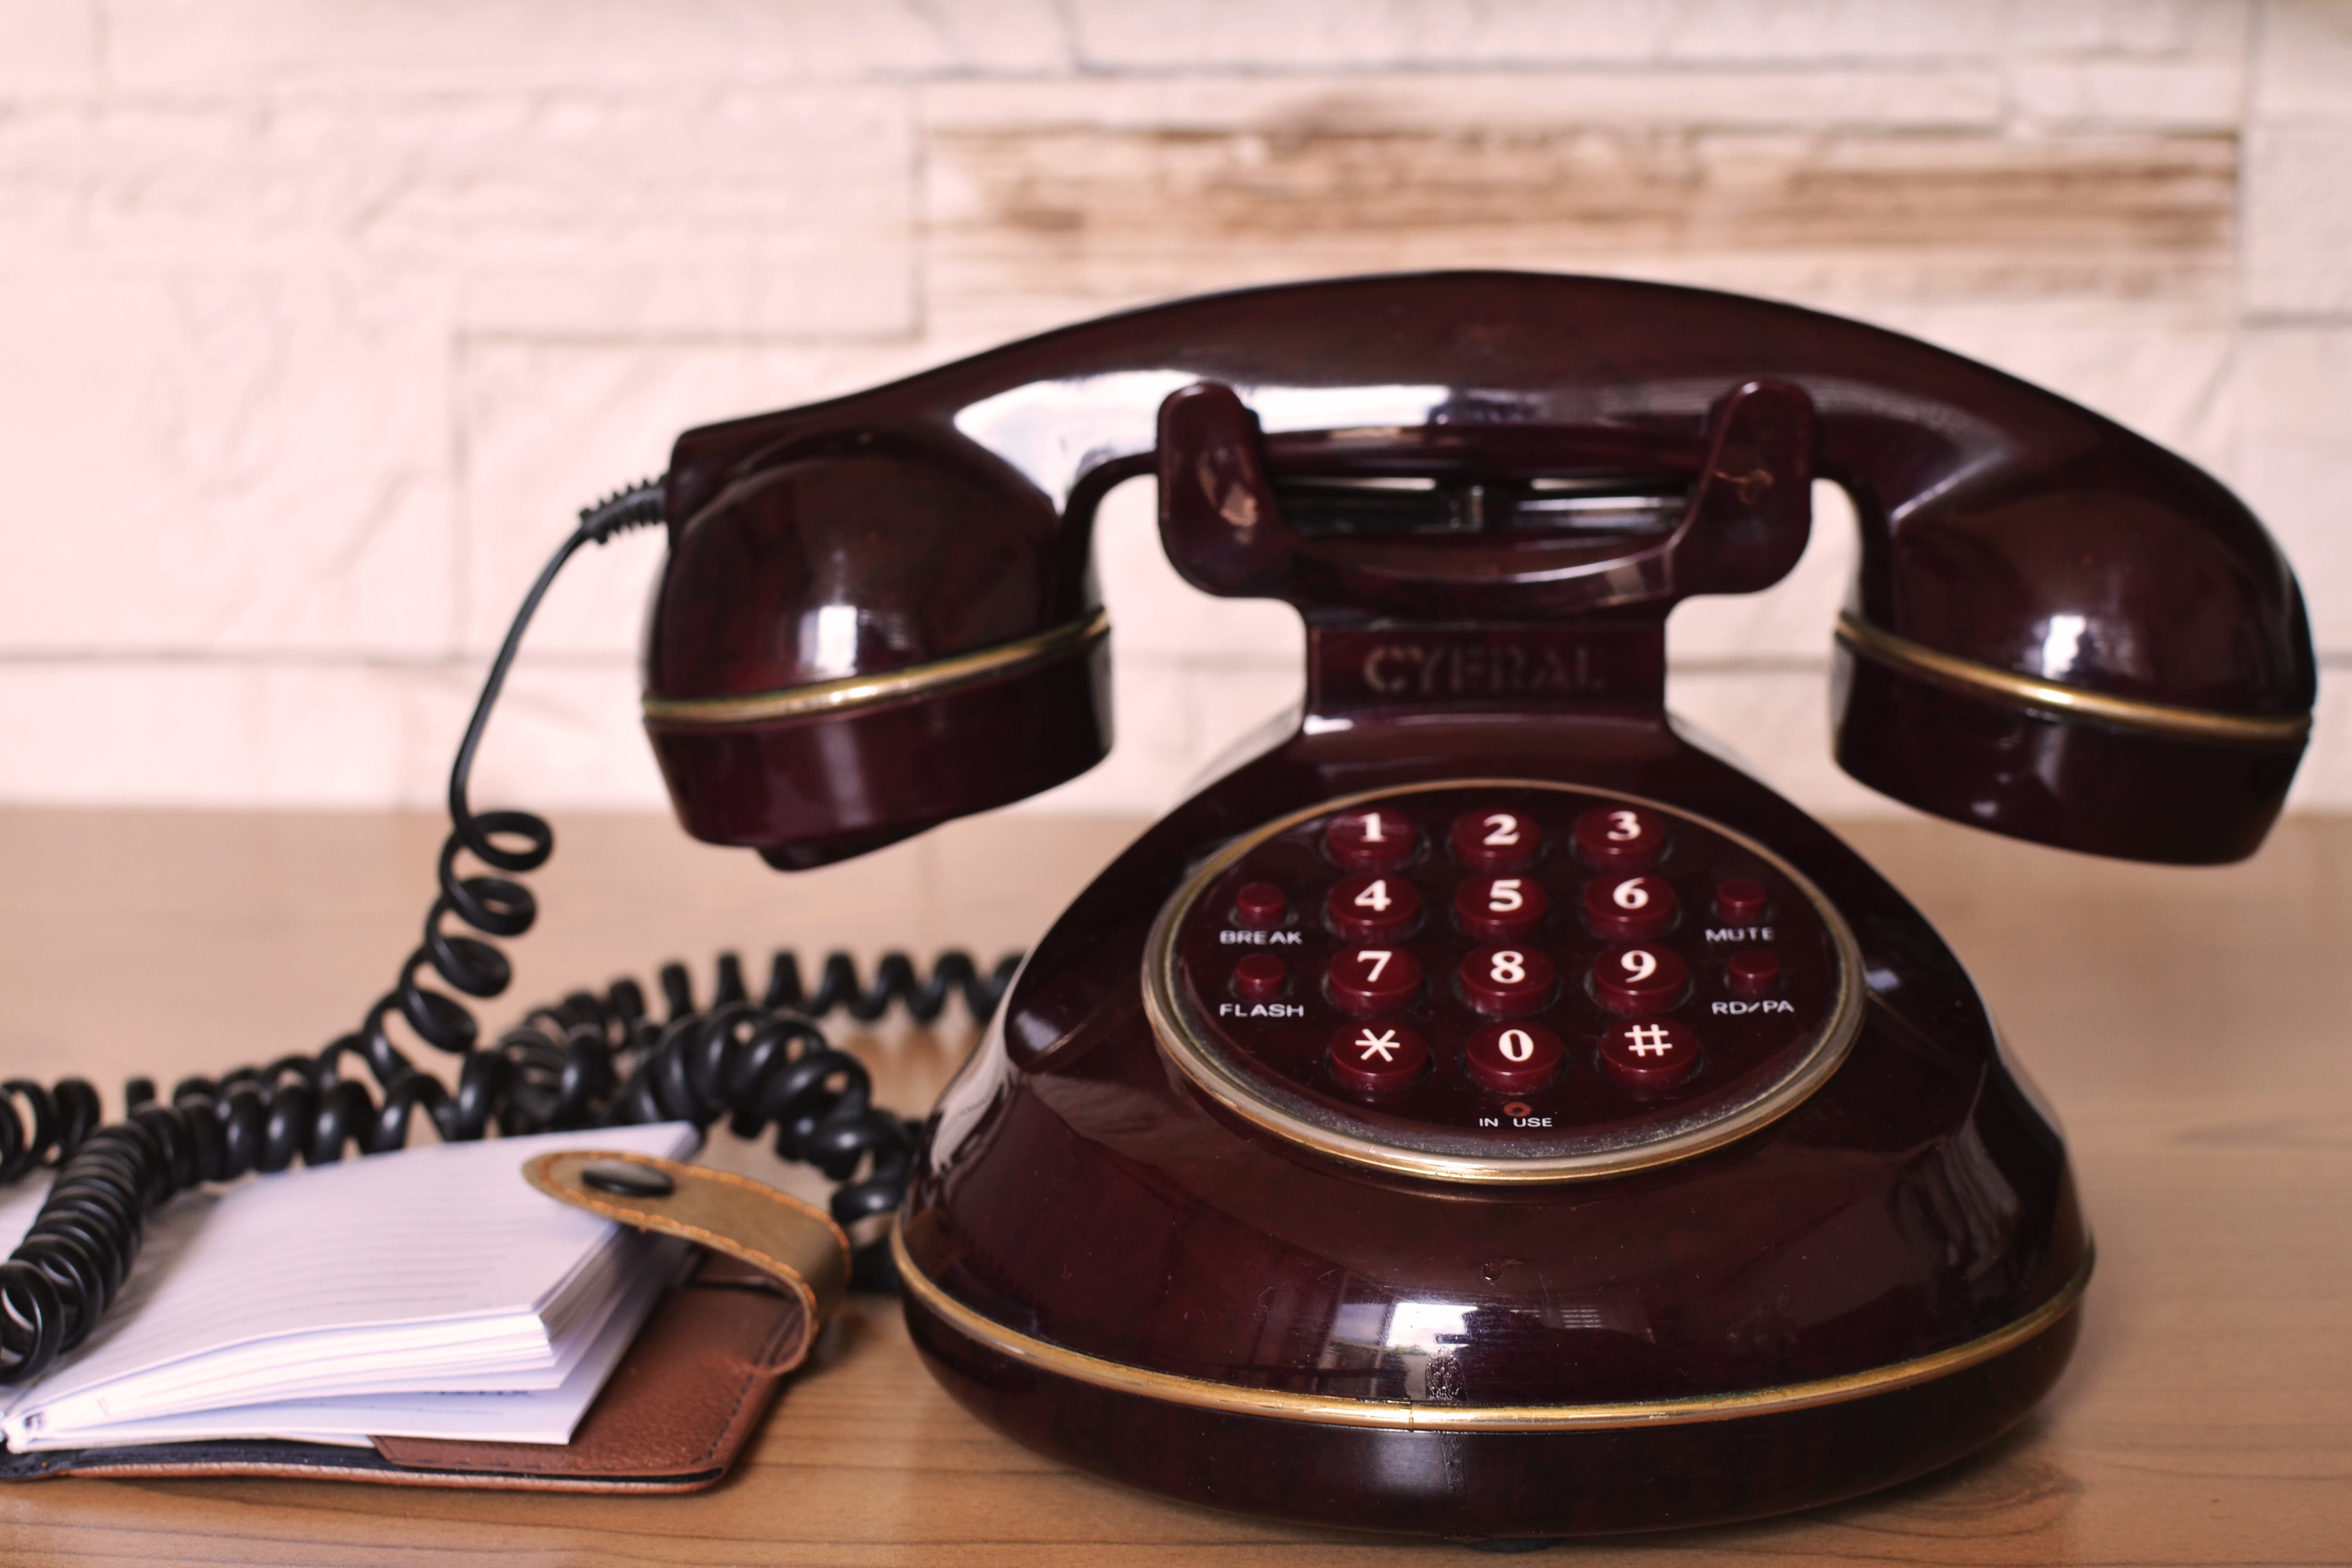 close up photo of brown cradle telephone